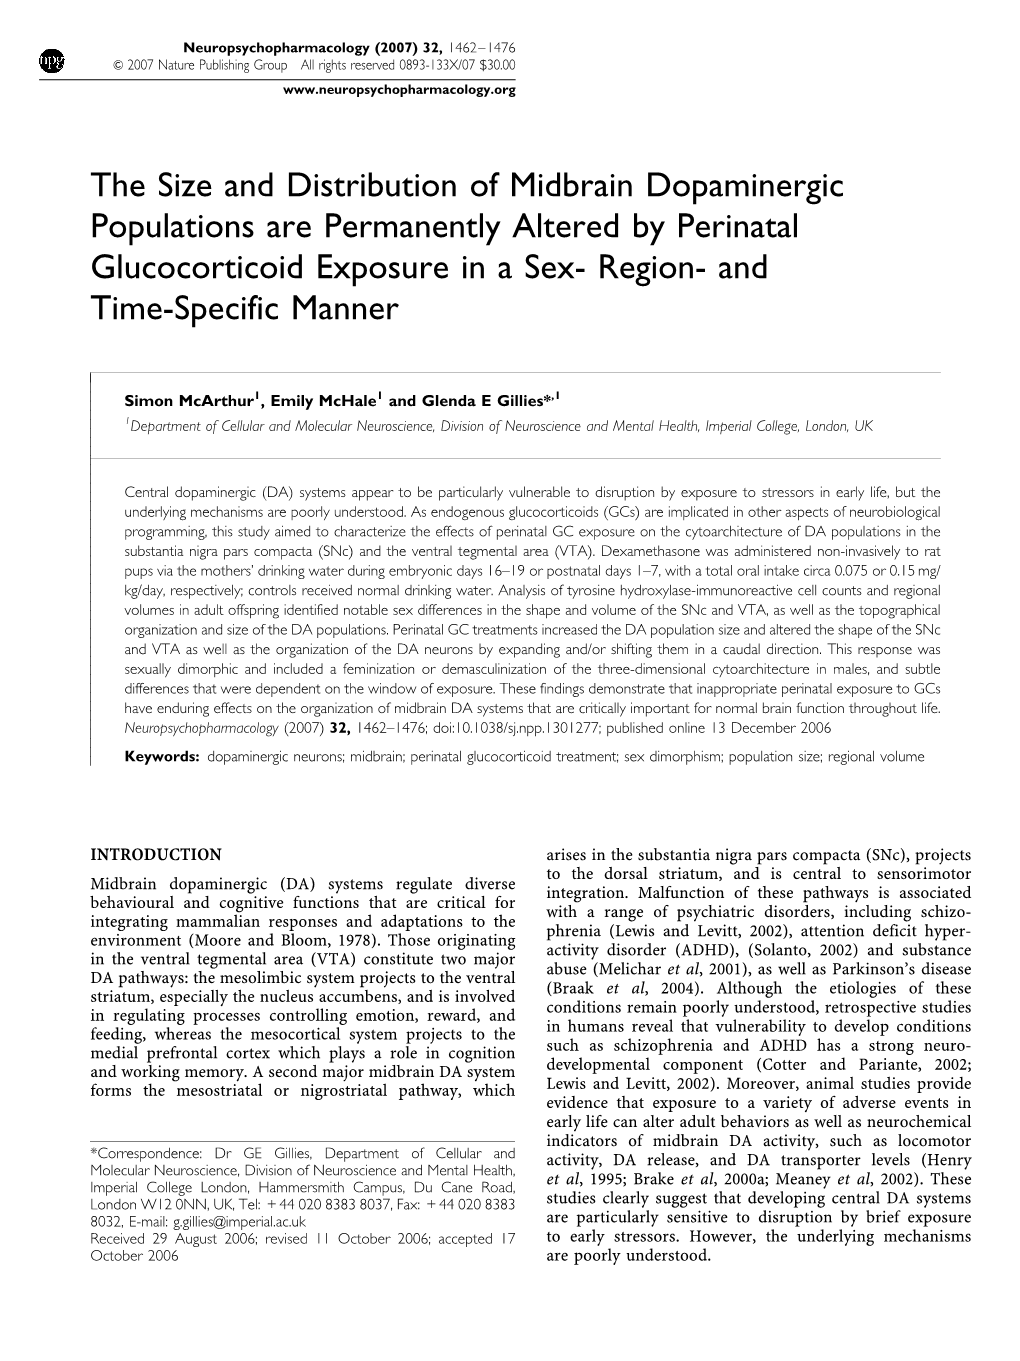 The Size and Distribution of Midbrain Dopaminergic Populations Are Permanently Altered by Perinatal Glucocorticoid Exposure in a Sex- Region- and Time-Specific Manner